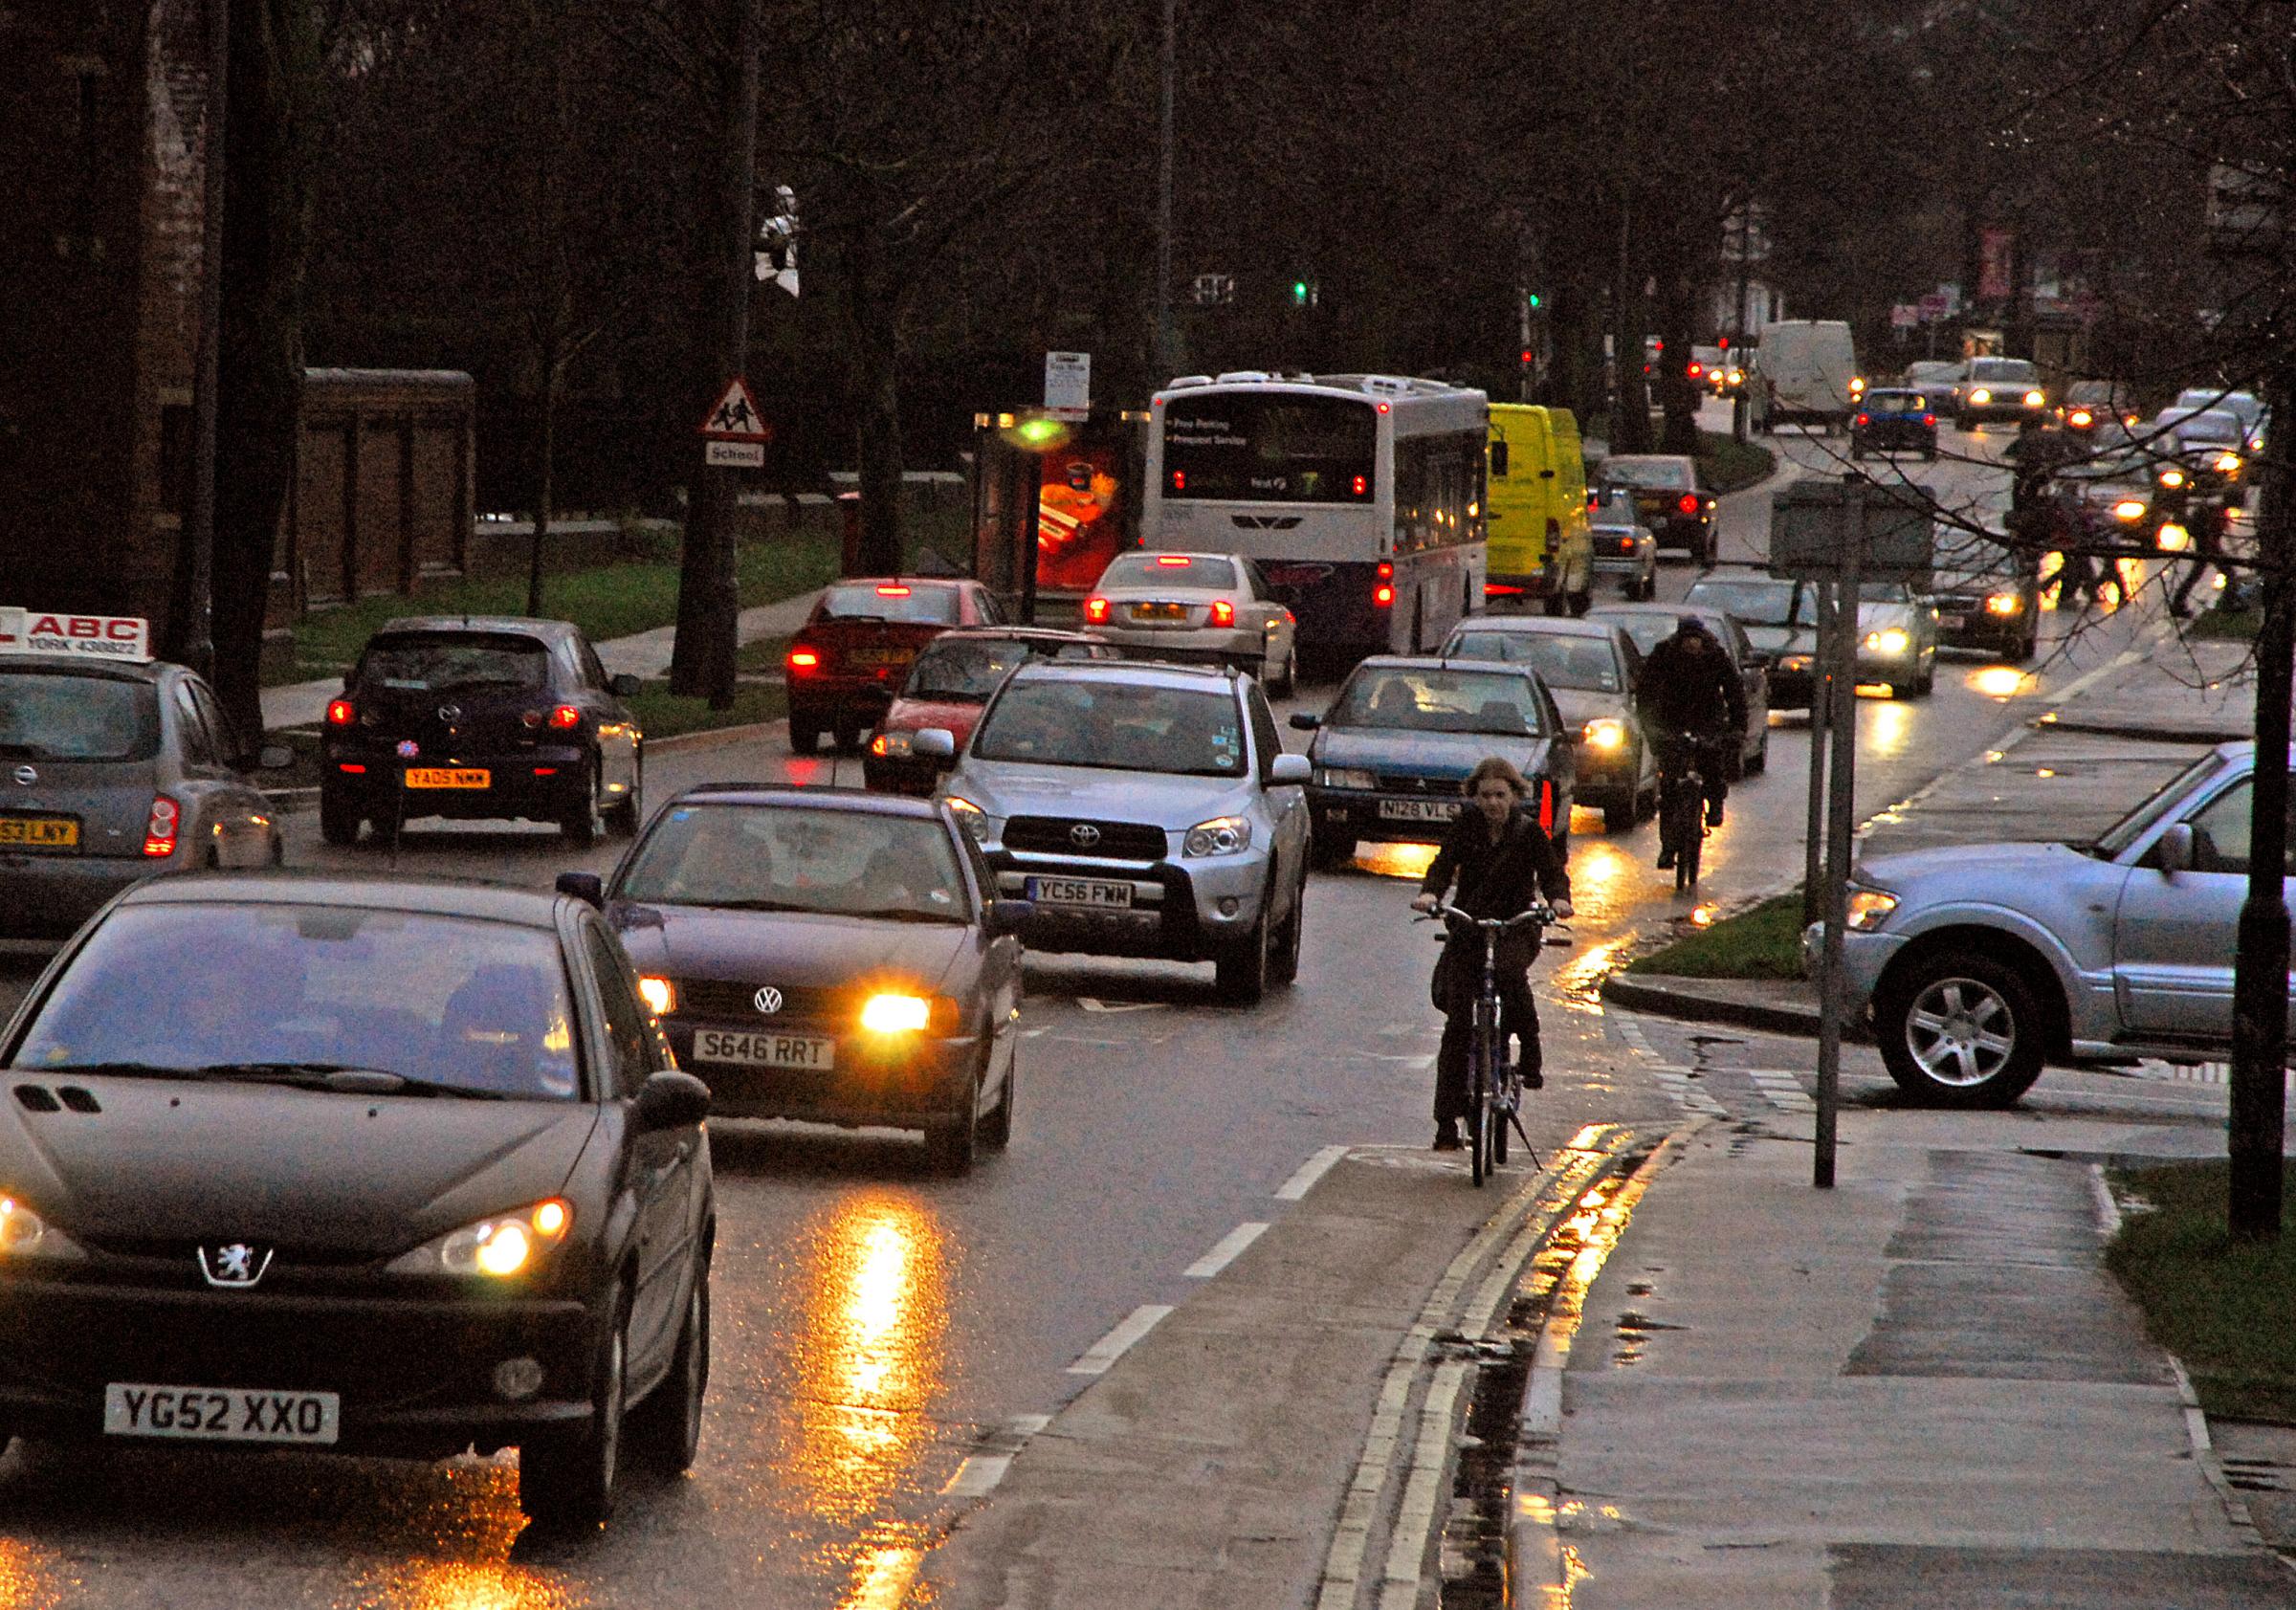 Funeral likely to cause heavy traffic in York